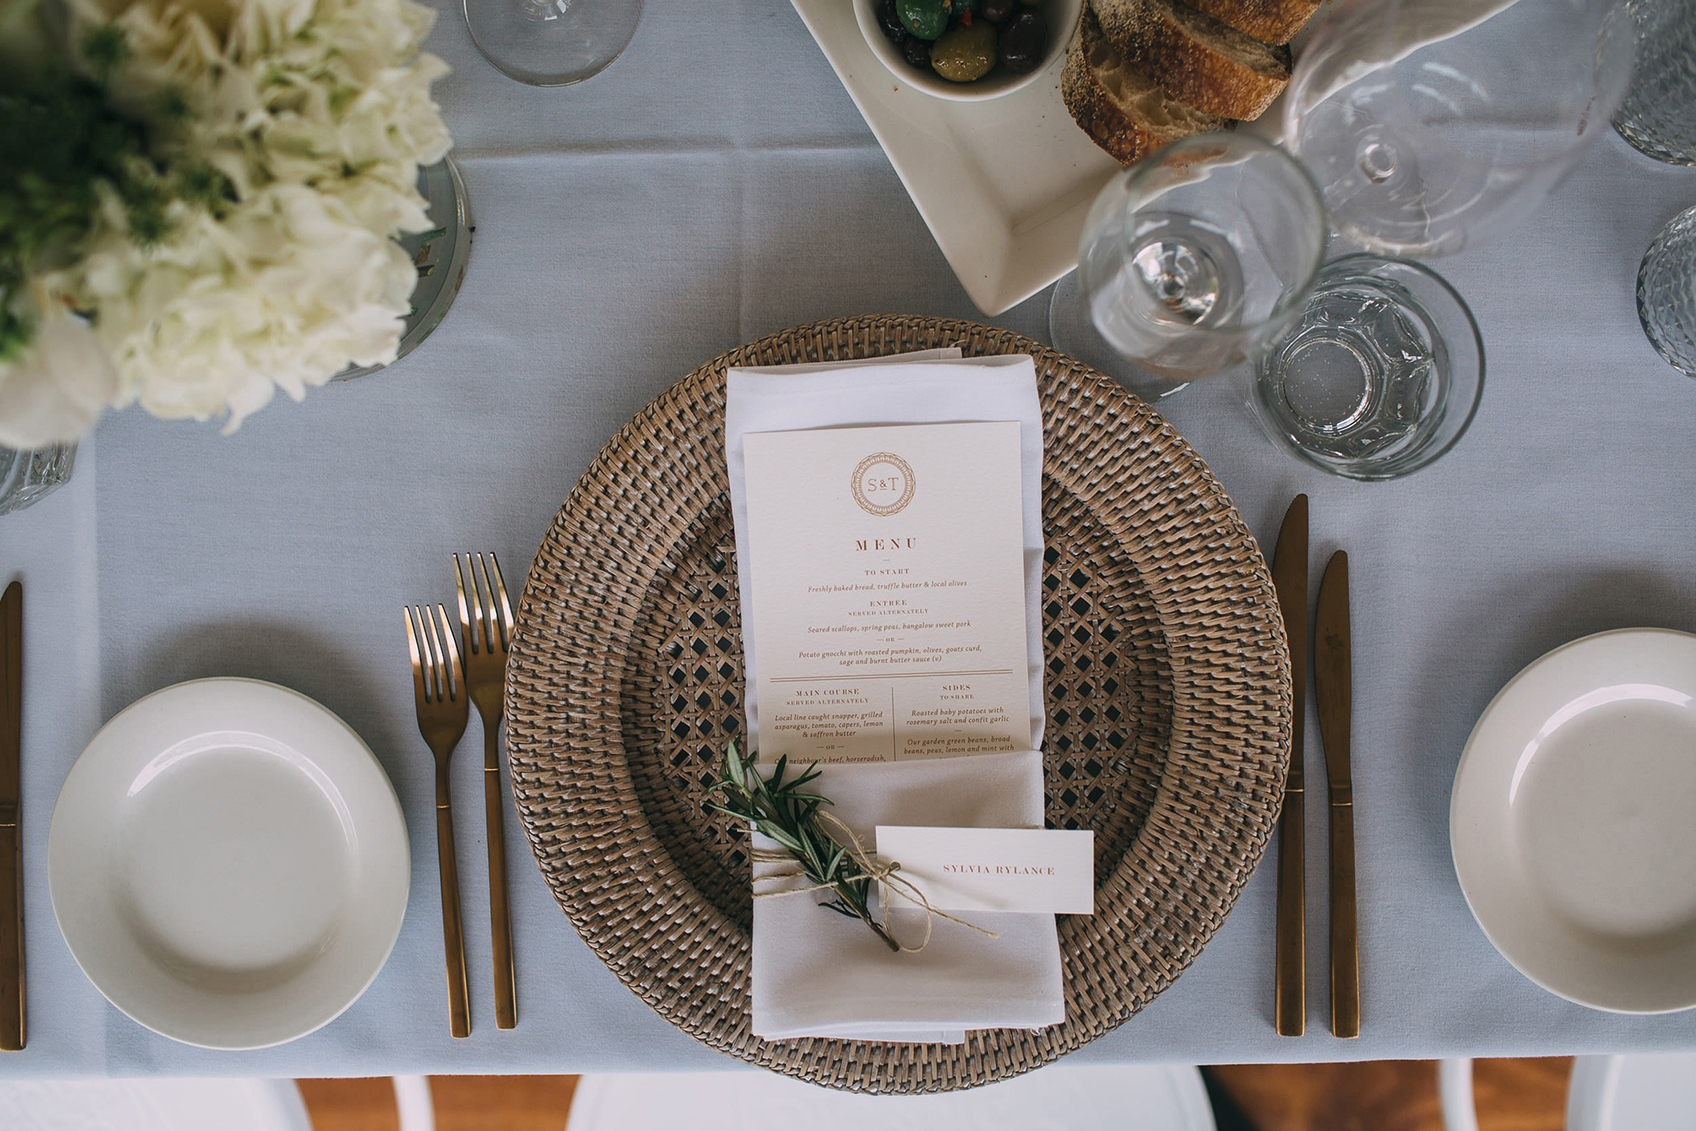 Gold Cutlery with Woven Charger Plate Table Setting and Menus - Copper & Gold Wedding Styling Inspiration - Yesterday Creative Letterpress Blog